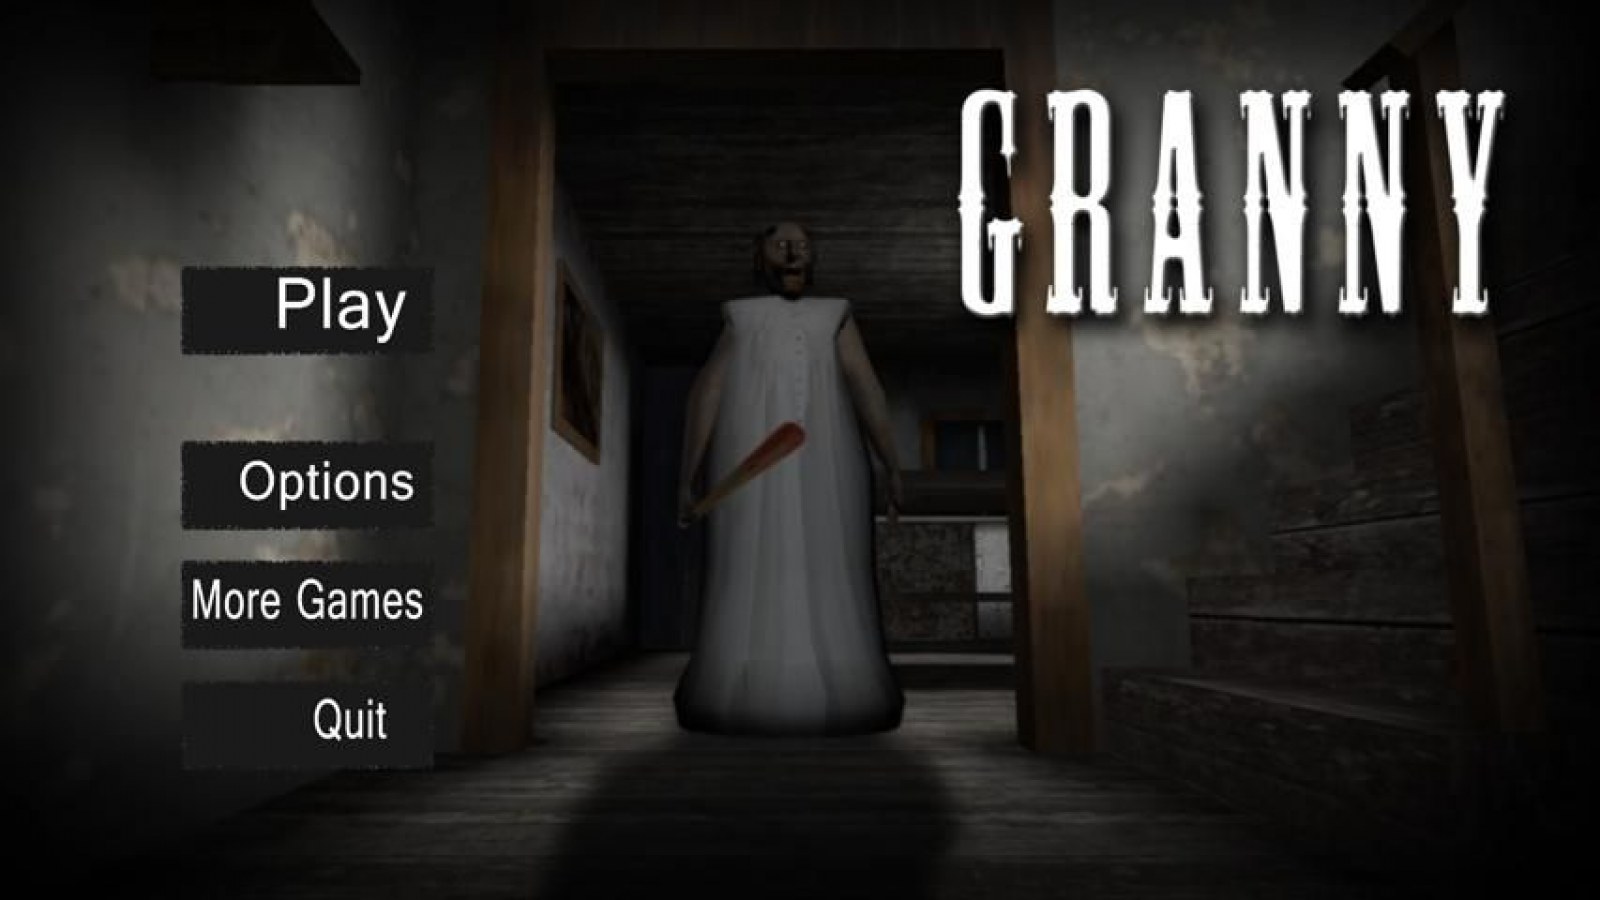 How To Beat Granny Horror Game Tips Steps Strategy For Getting Out Of The House Alive - how do you crawl in roblox granny